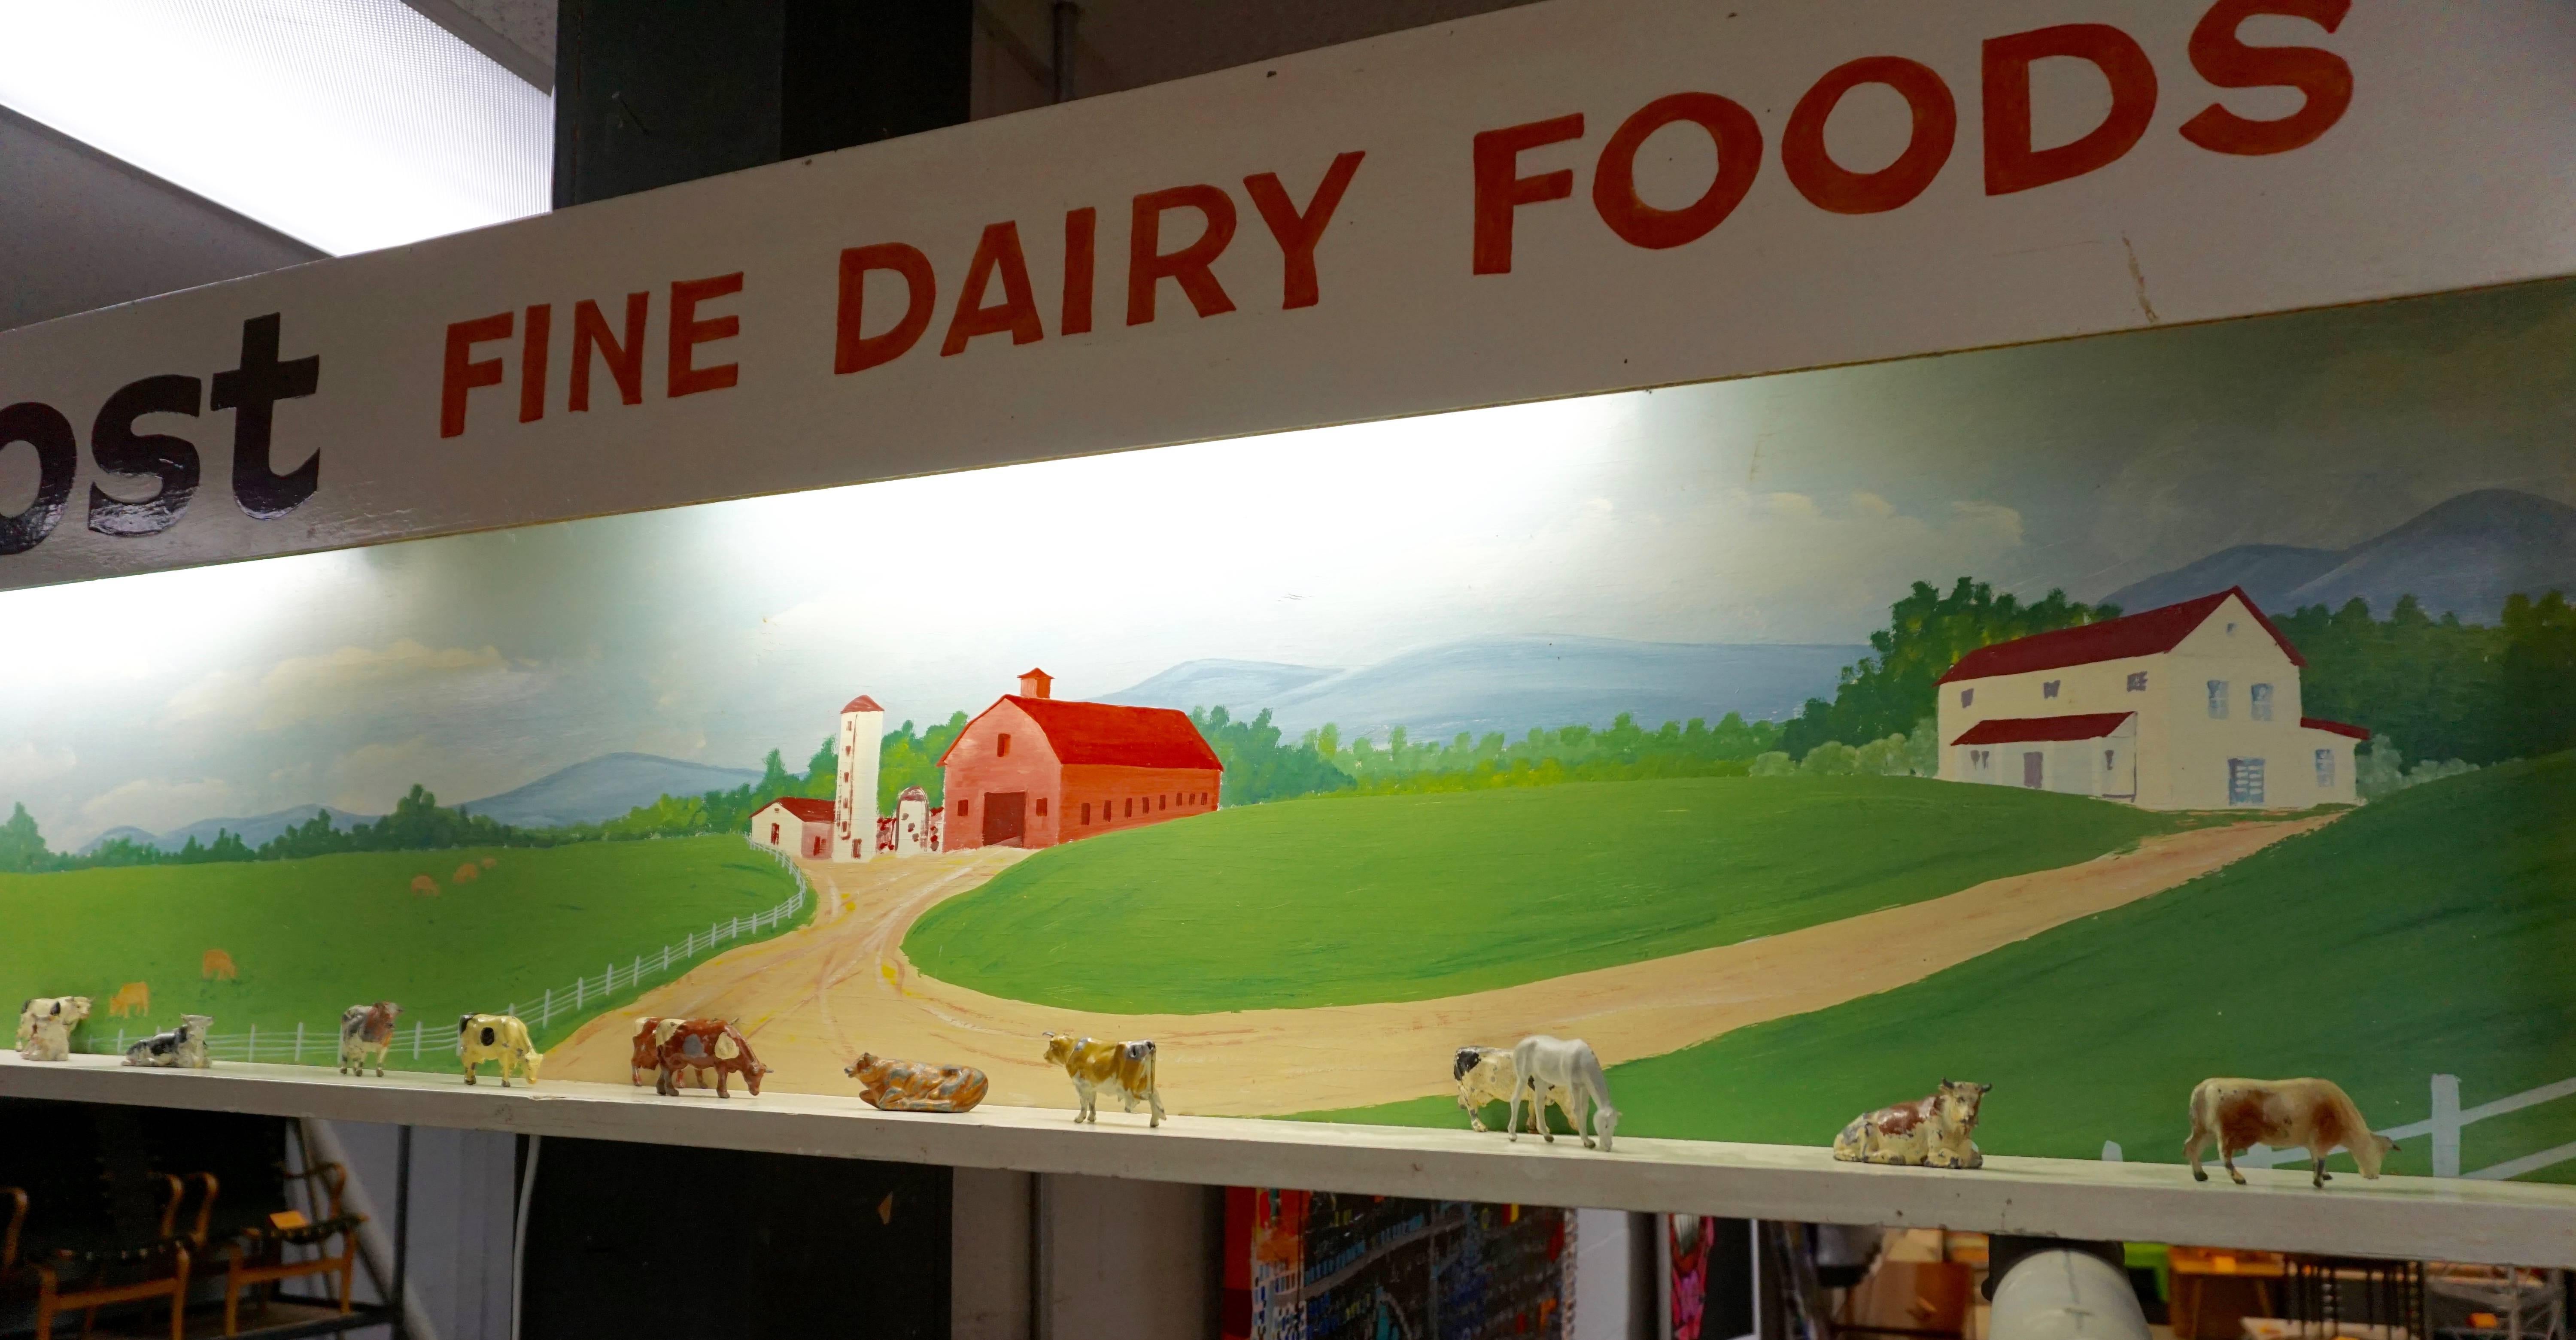 Country 1950s Foremost Fine Dairy Food Advertising Sign